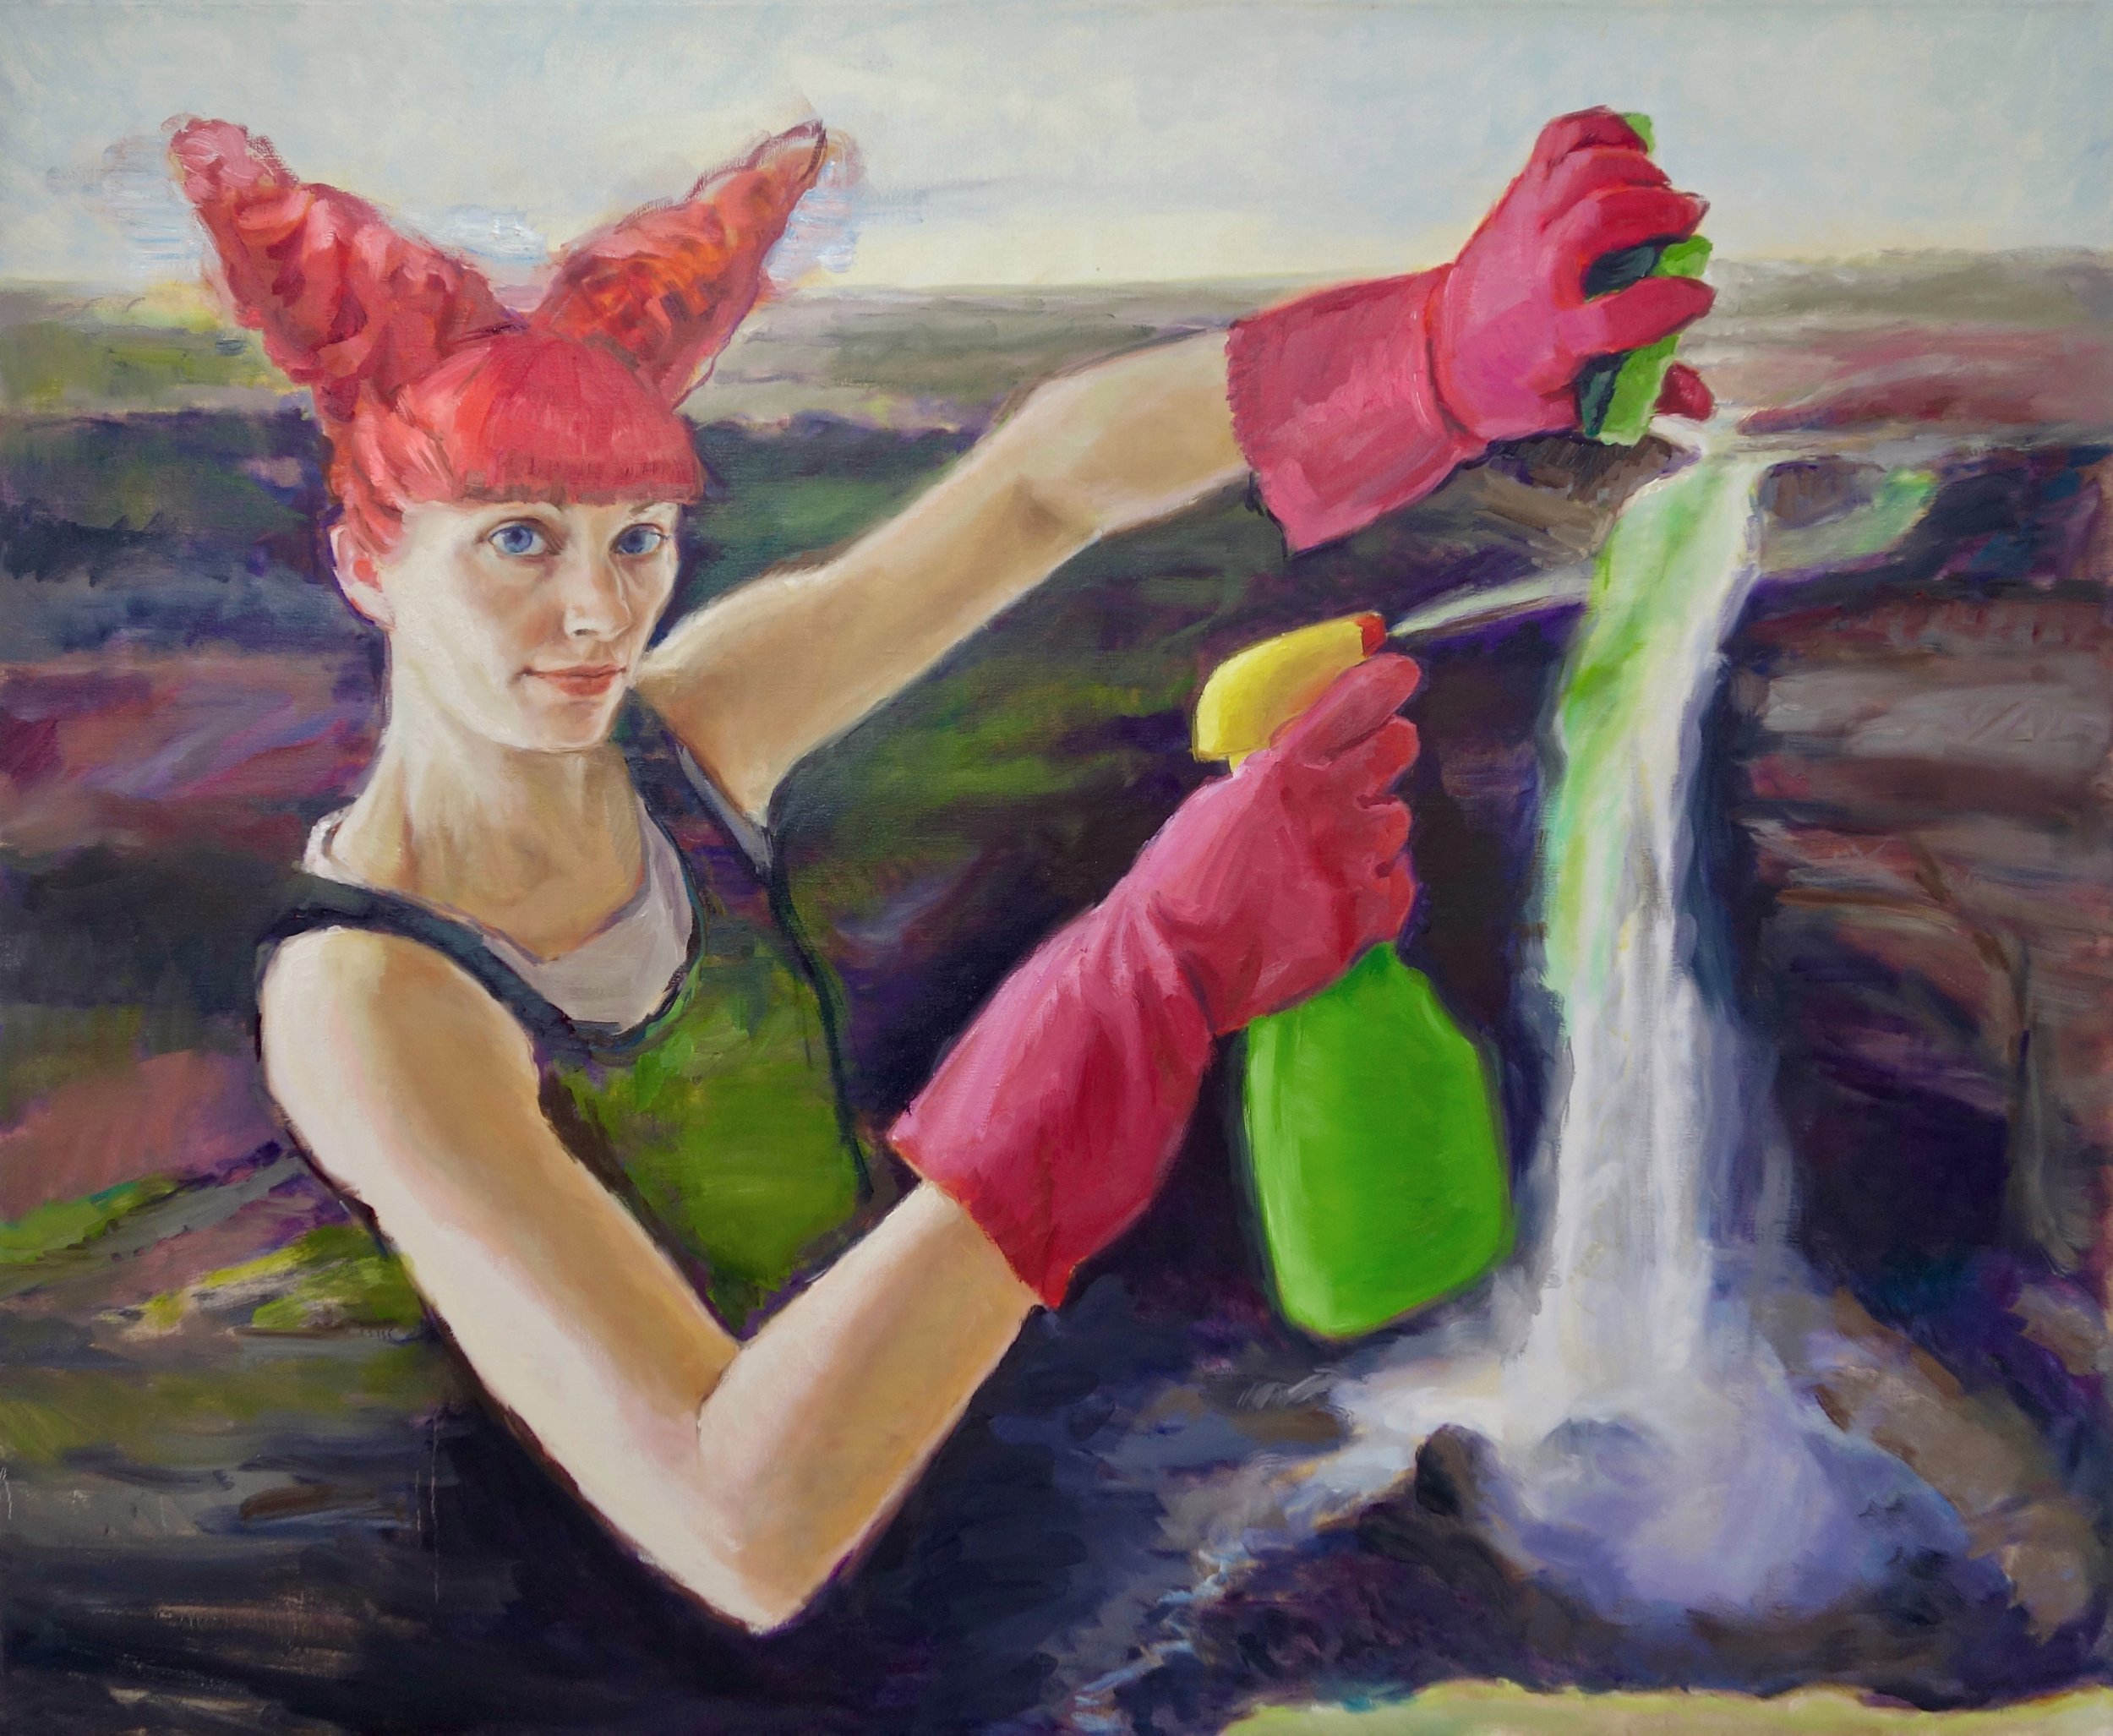 'One green squirt where it's needed' 140x170 cm, oil on linen 2015 - 2020